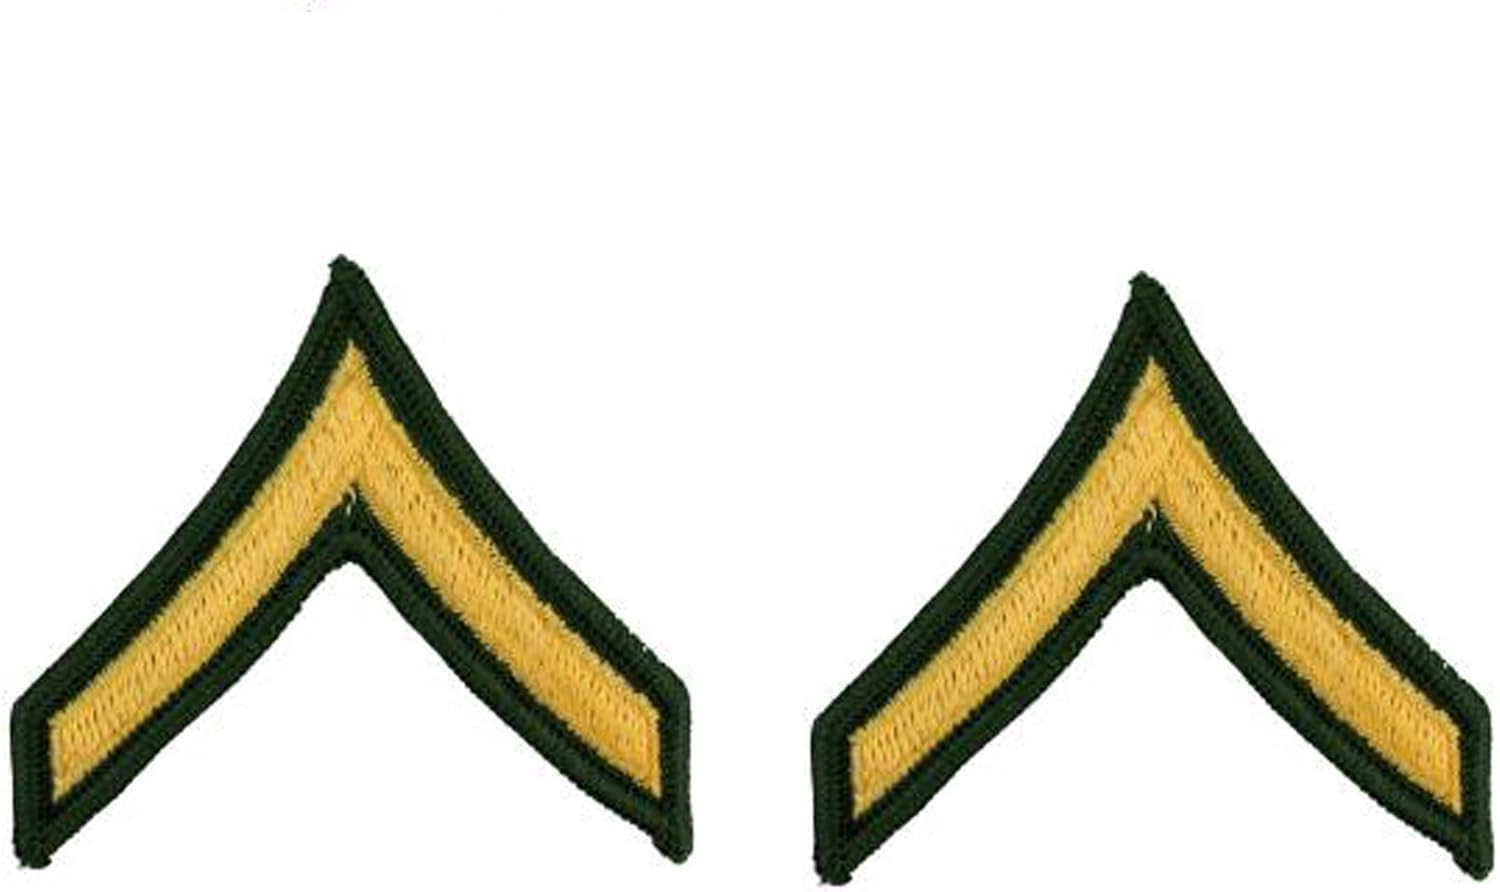 custom Choose Rank Army Insignia iron-on patches Corporal stripes embroidered patch choice of colors